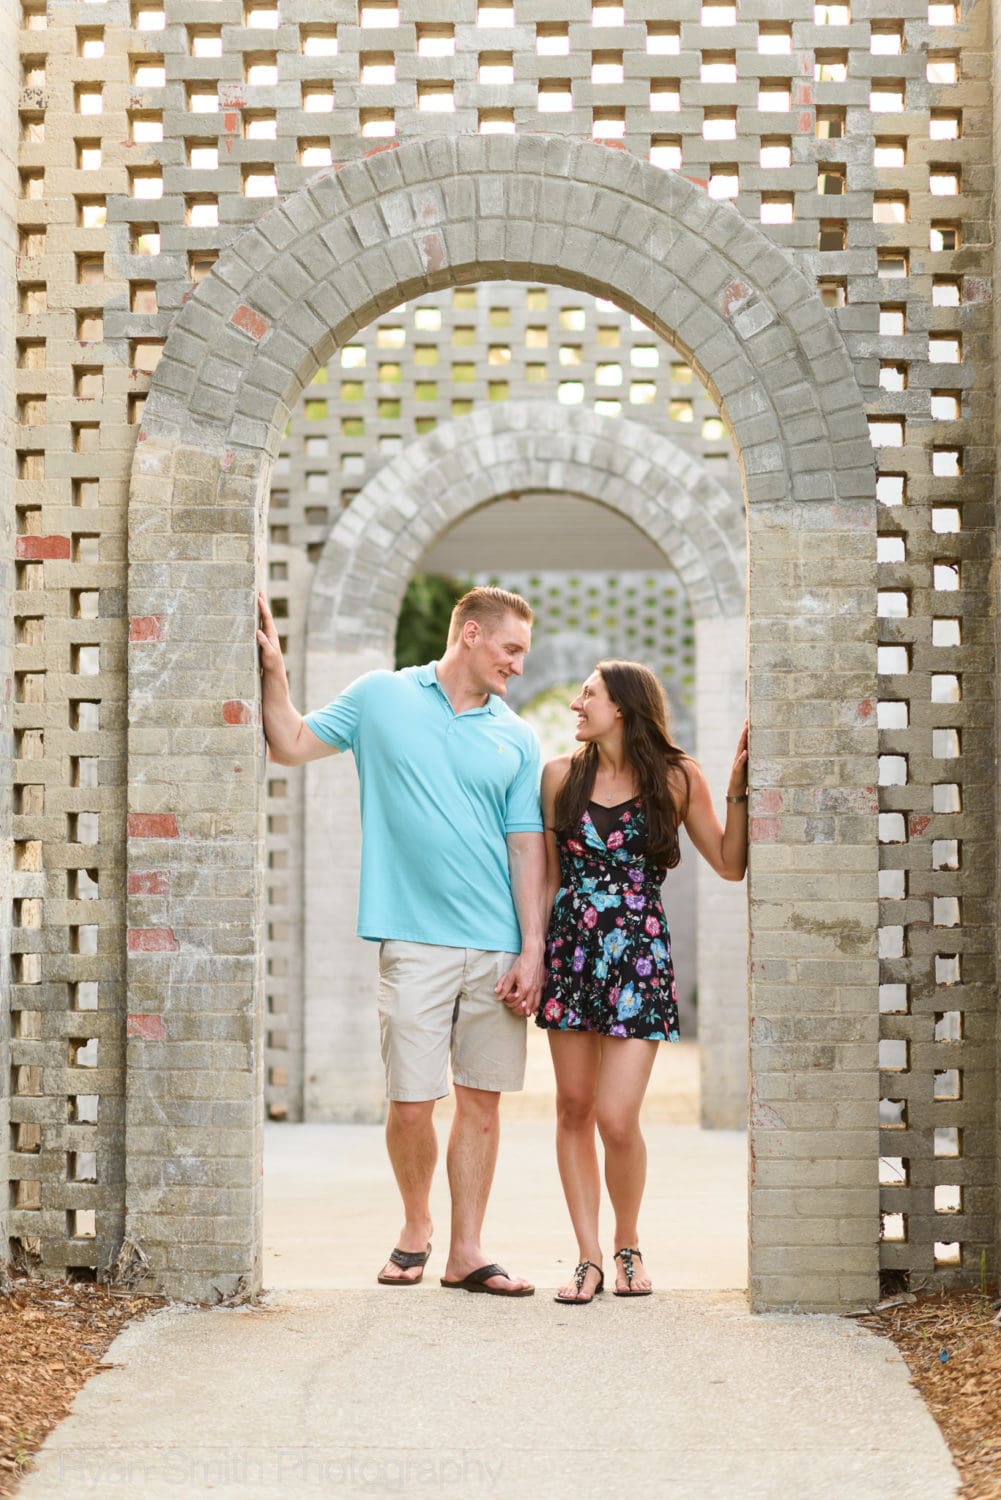 Smiling at each other in the Sculpture Center archway - Brookgreen Gardens